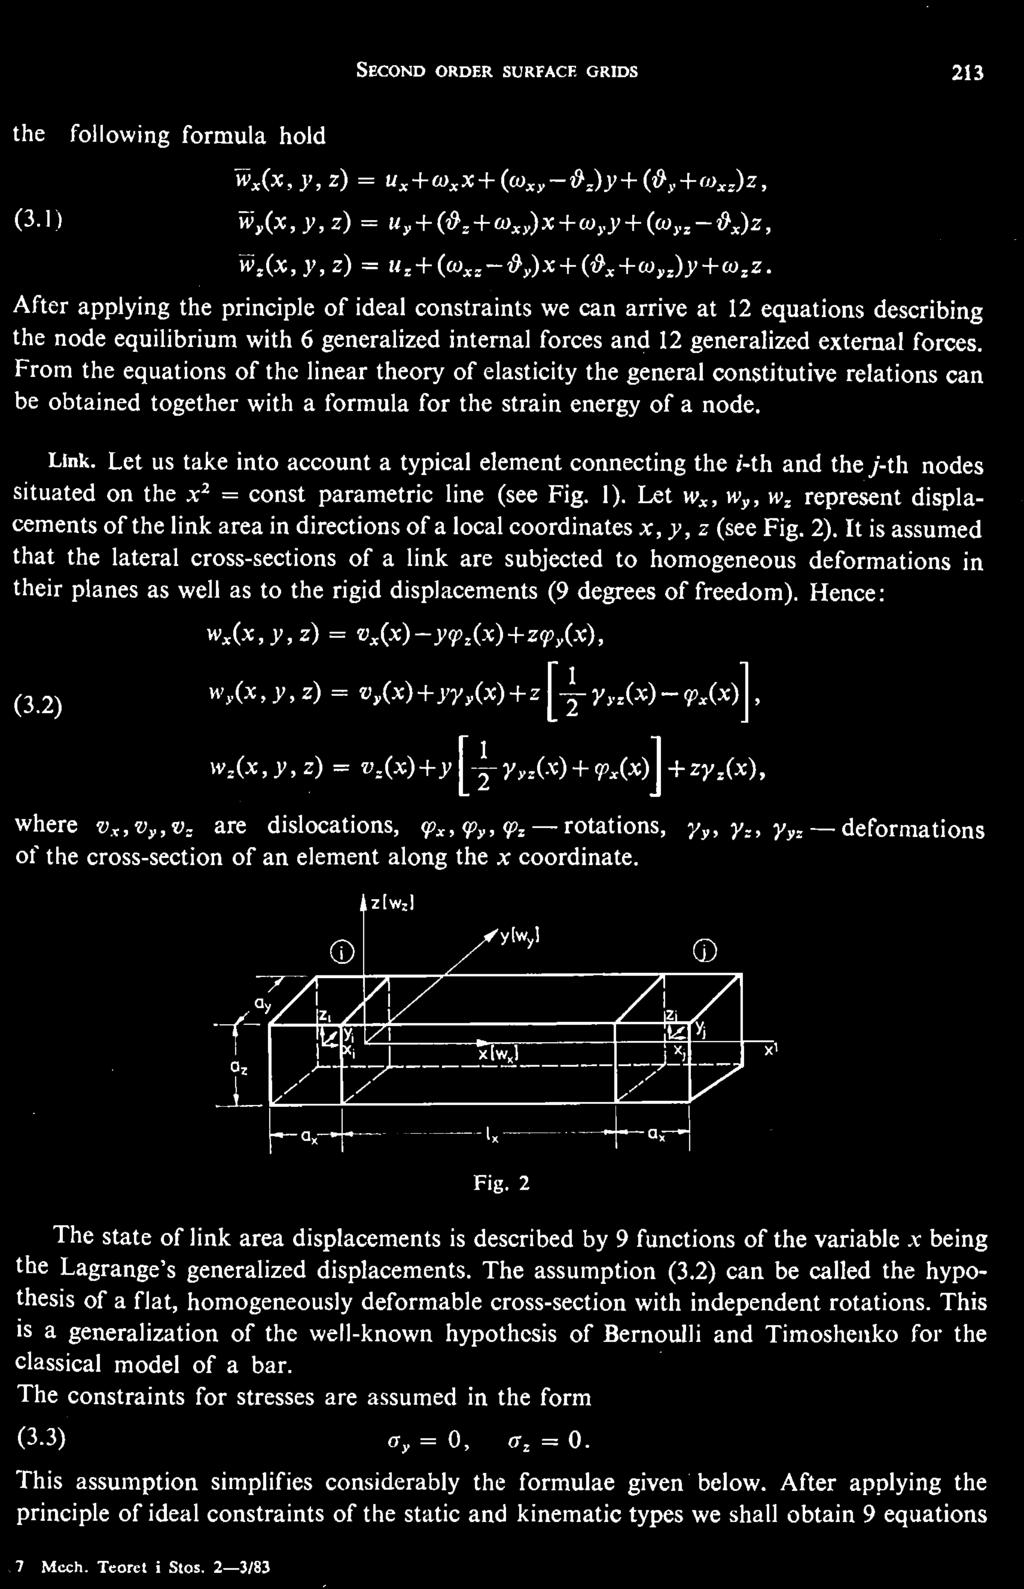 It s assumed that the lateral cross sectons of a lnk are subjected to homogeneous deformatons n ther planes as well as to the rgd dsplacements (9 degrees of freedom).